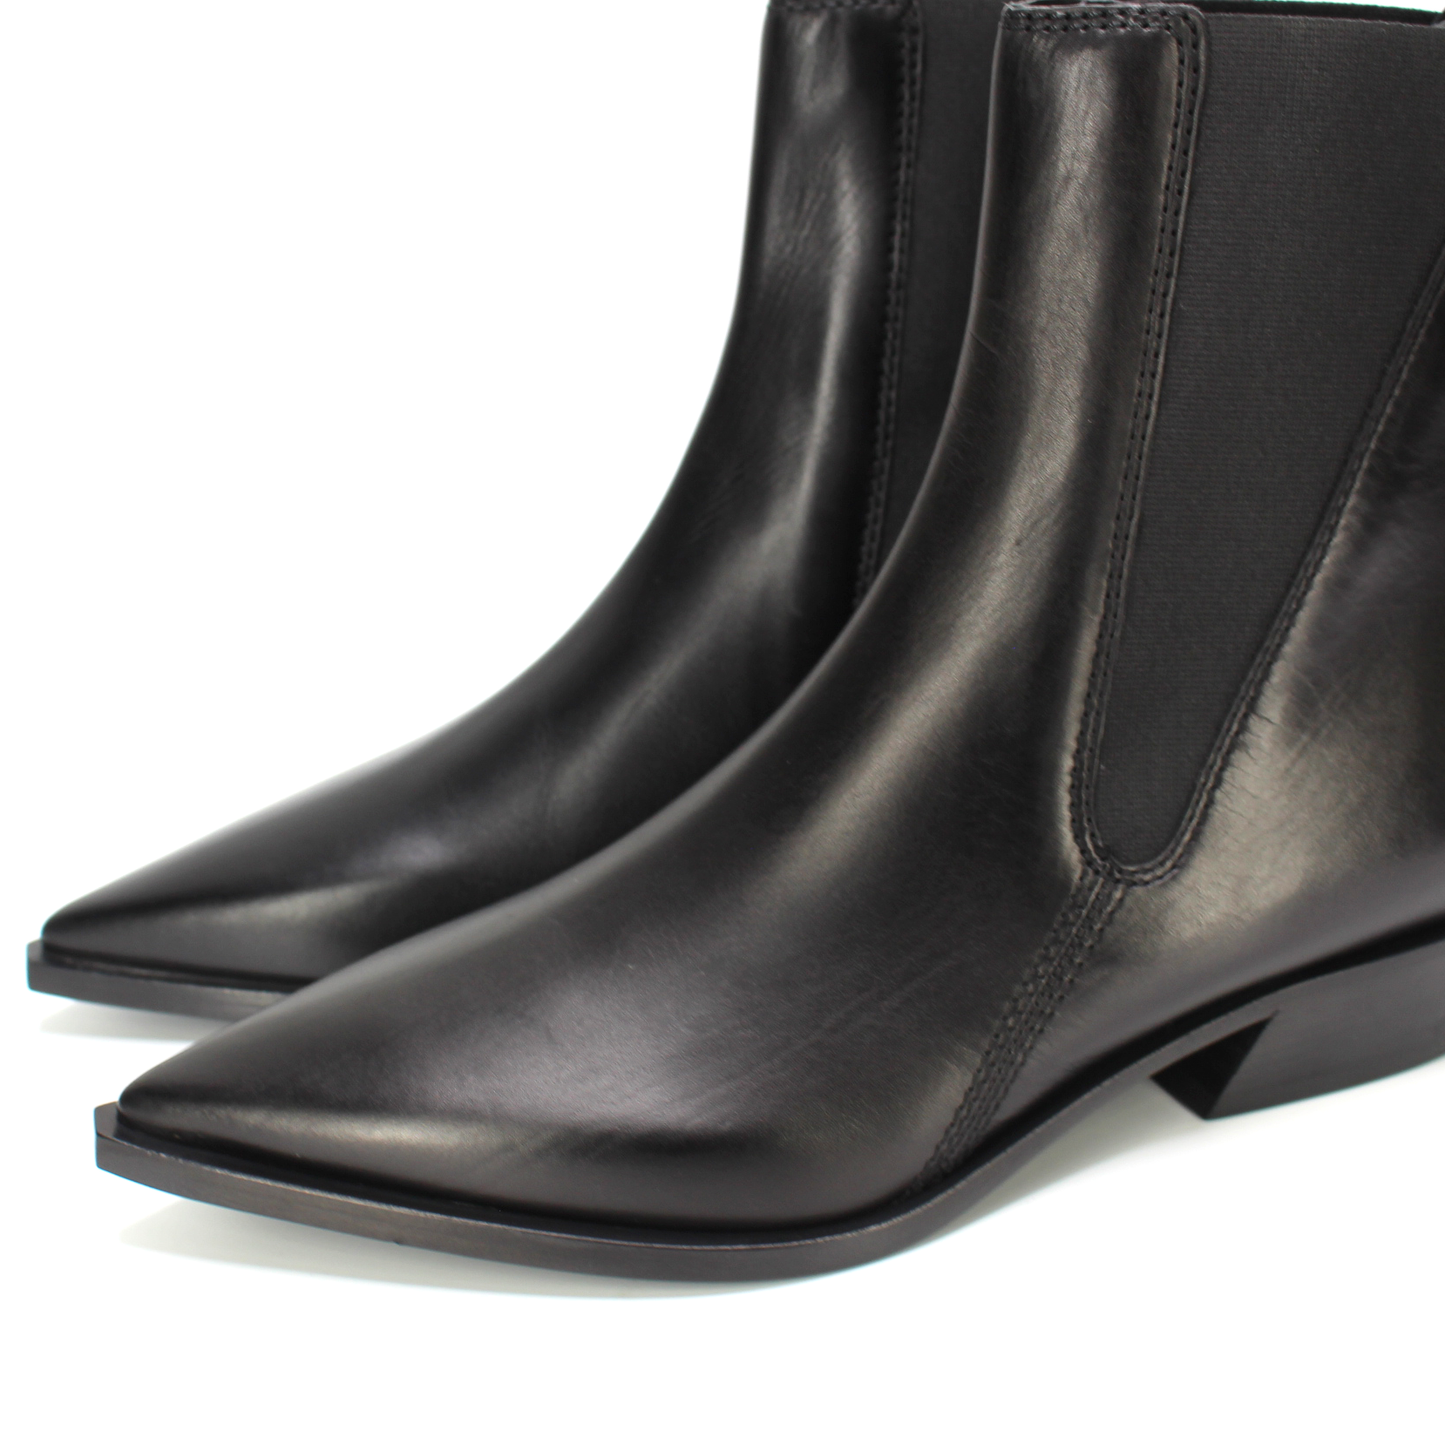 Burberry Grampian Leather Chelsea Boots